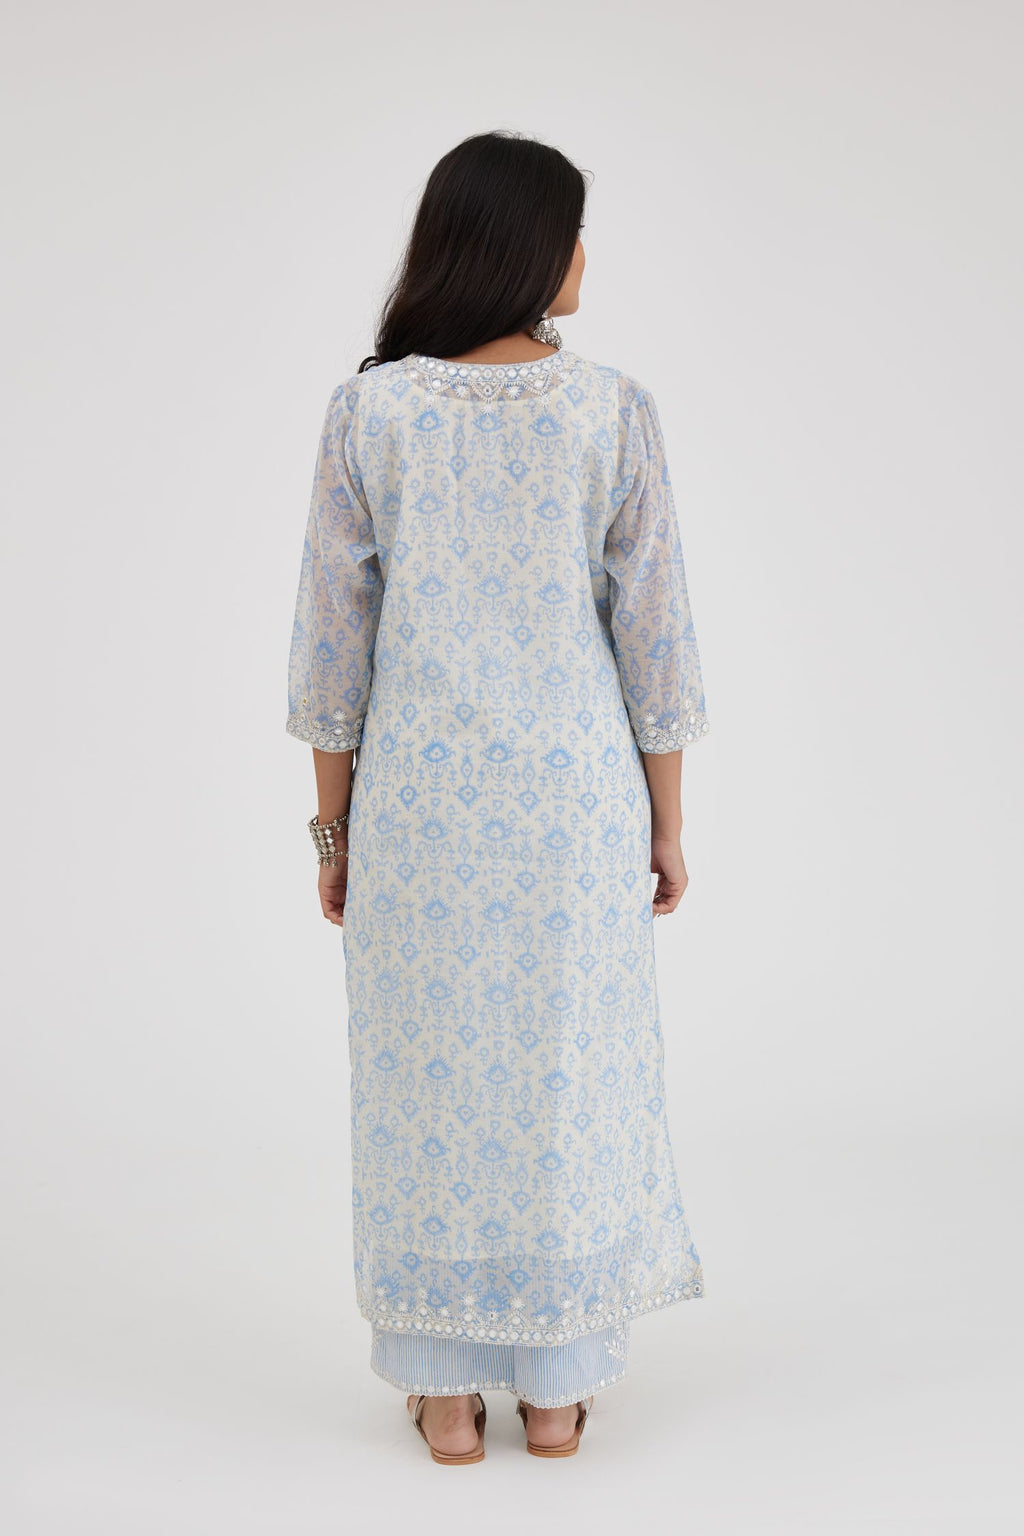 Ikat design blue and off white hand block-printed Cotton Chanderi straight long kurta set with off-white thread and mirror embroidery.